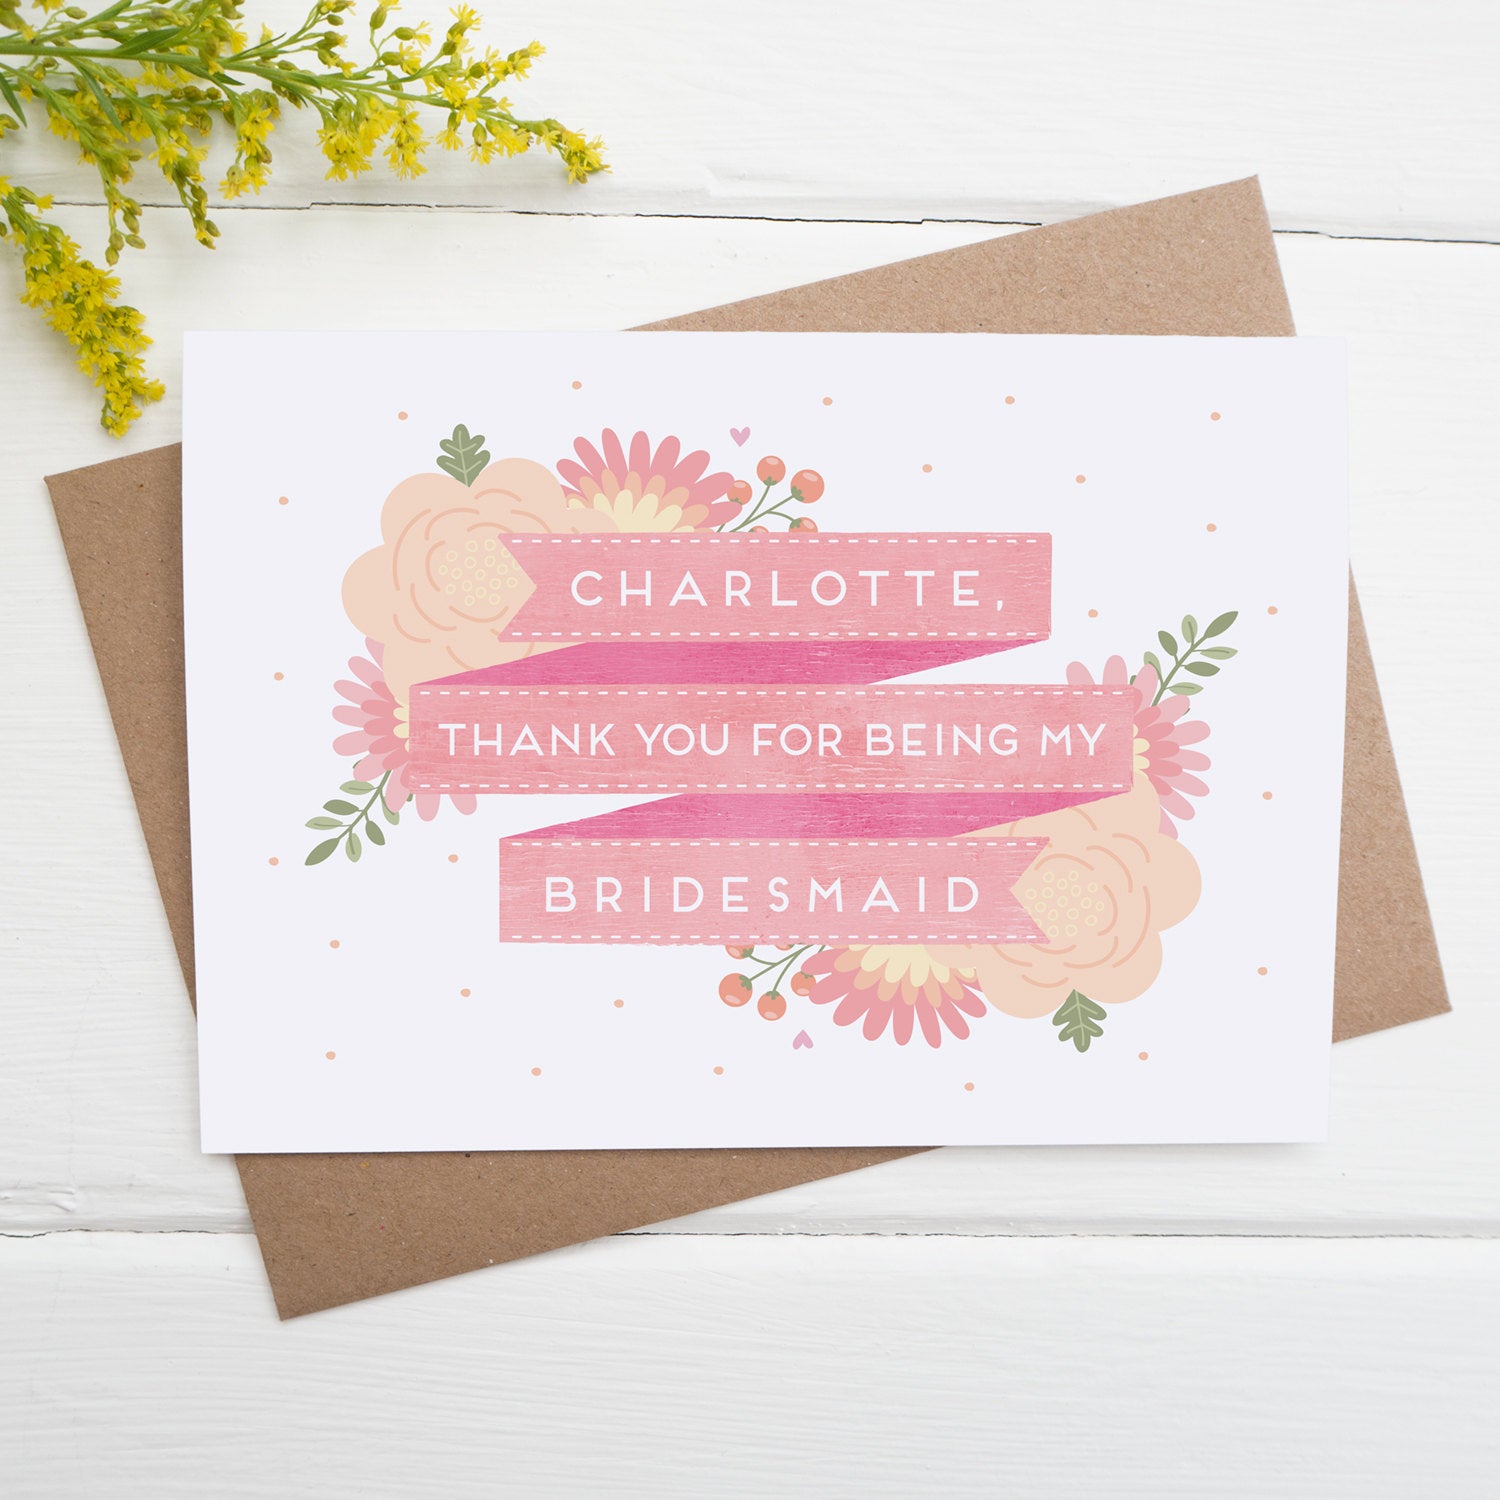 Personalised thank you for being my bridesmaid card in pink